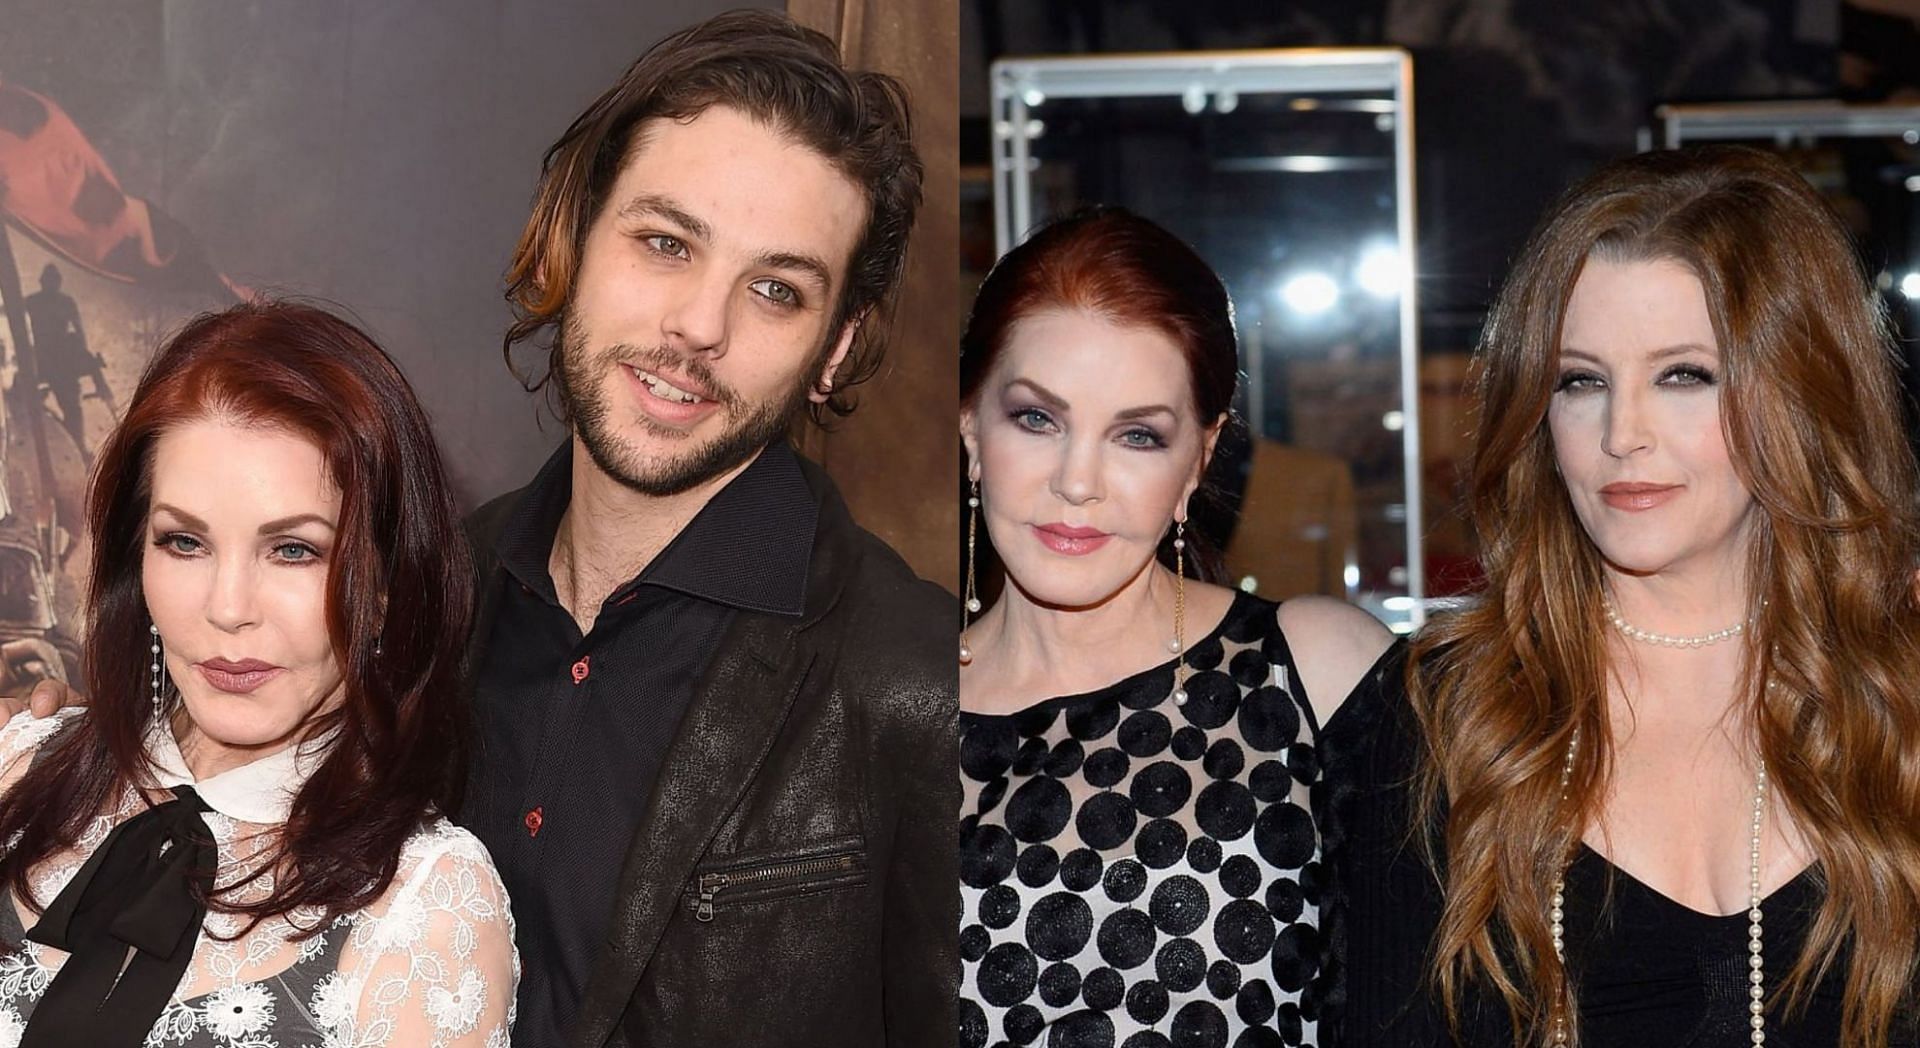 Did Priscilla Presley Have A Son All About Navarone Garibaldi As He Shares Touching Tribute To 